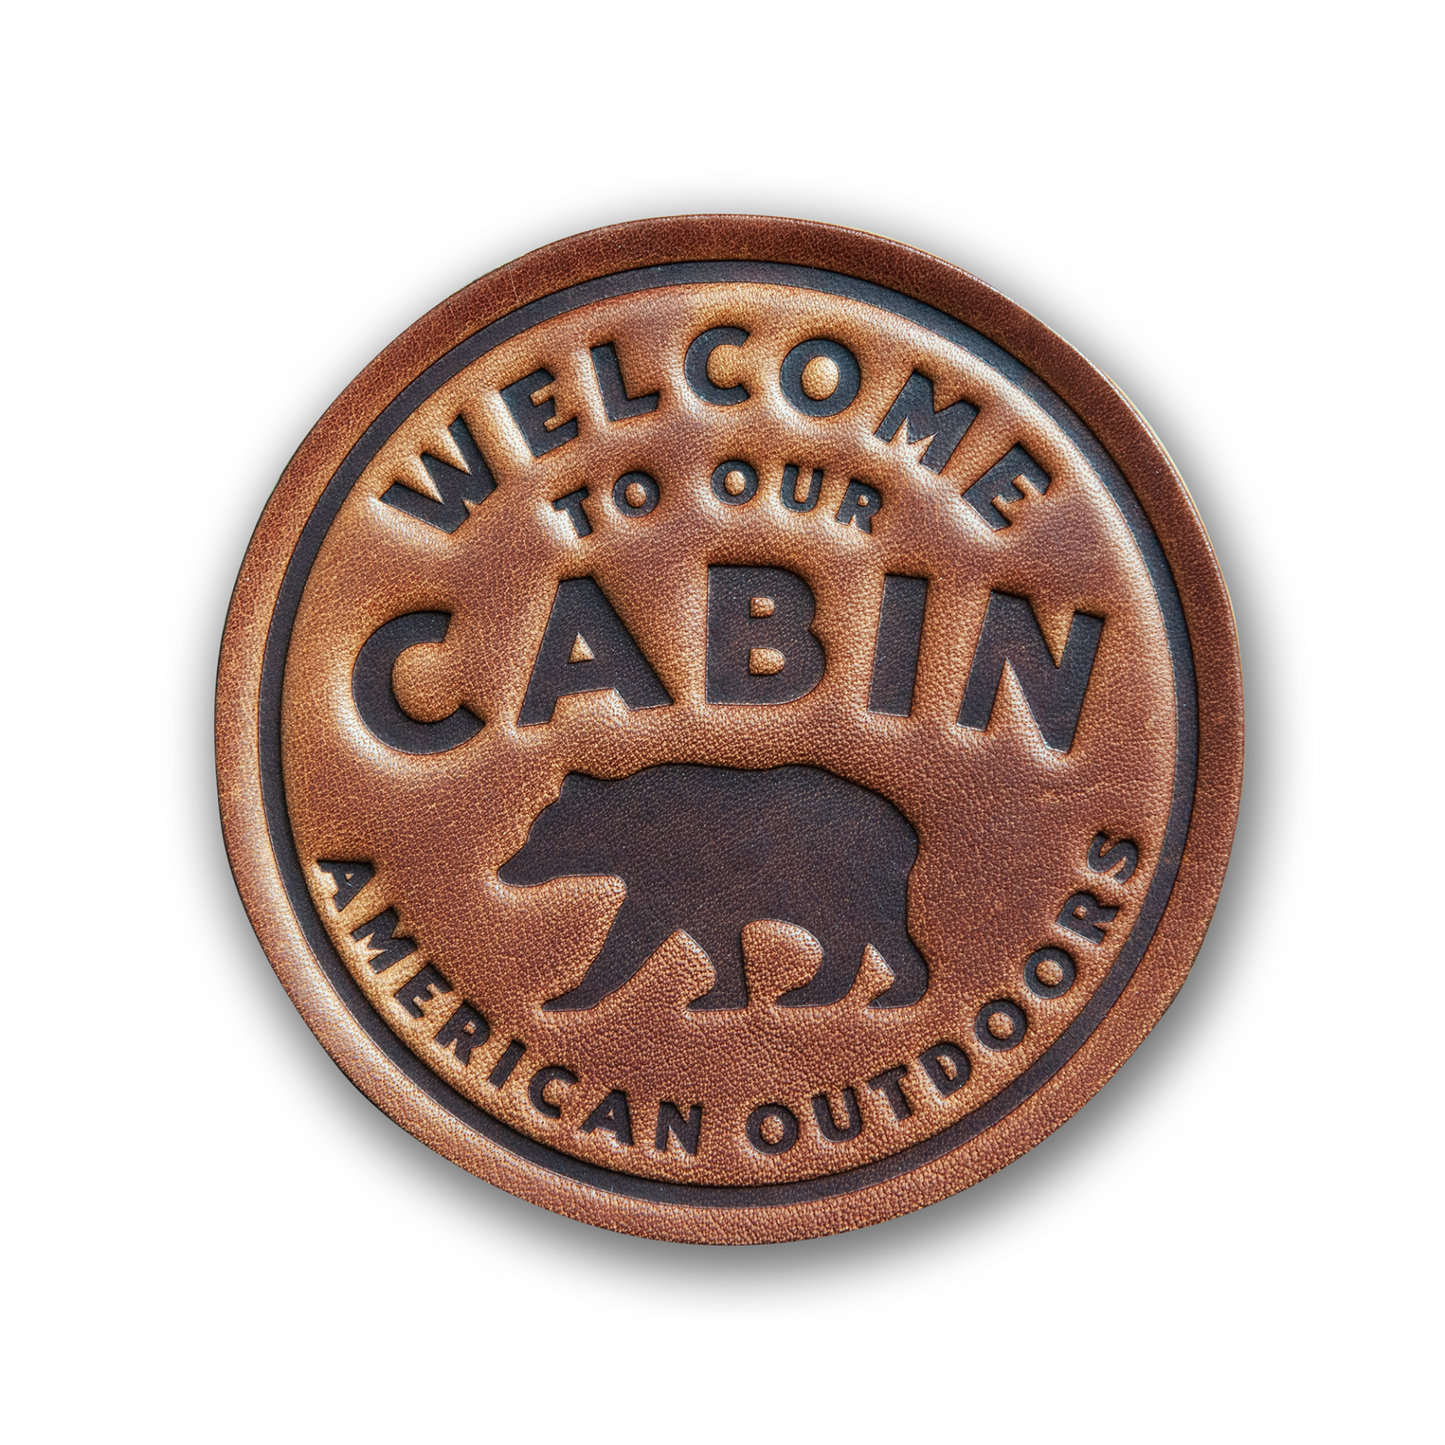 WELCOME TO OUR CABIN COASTER